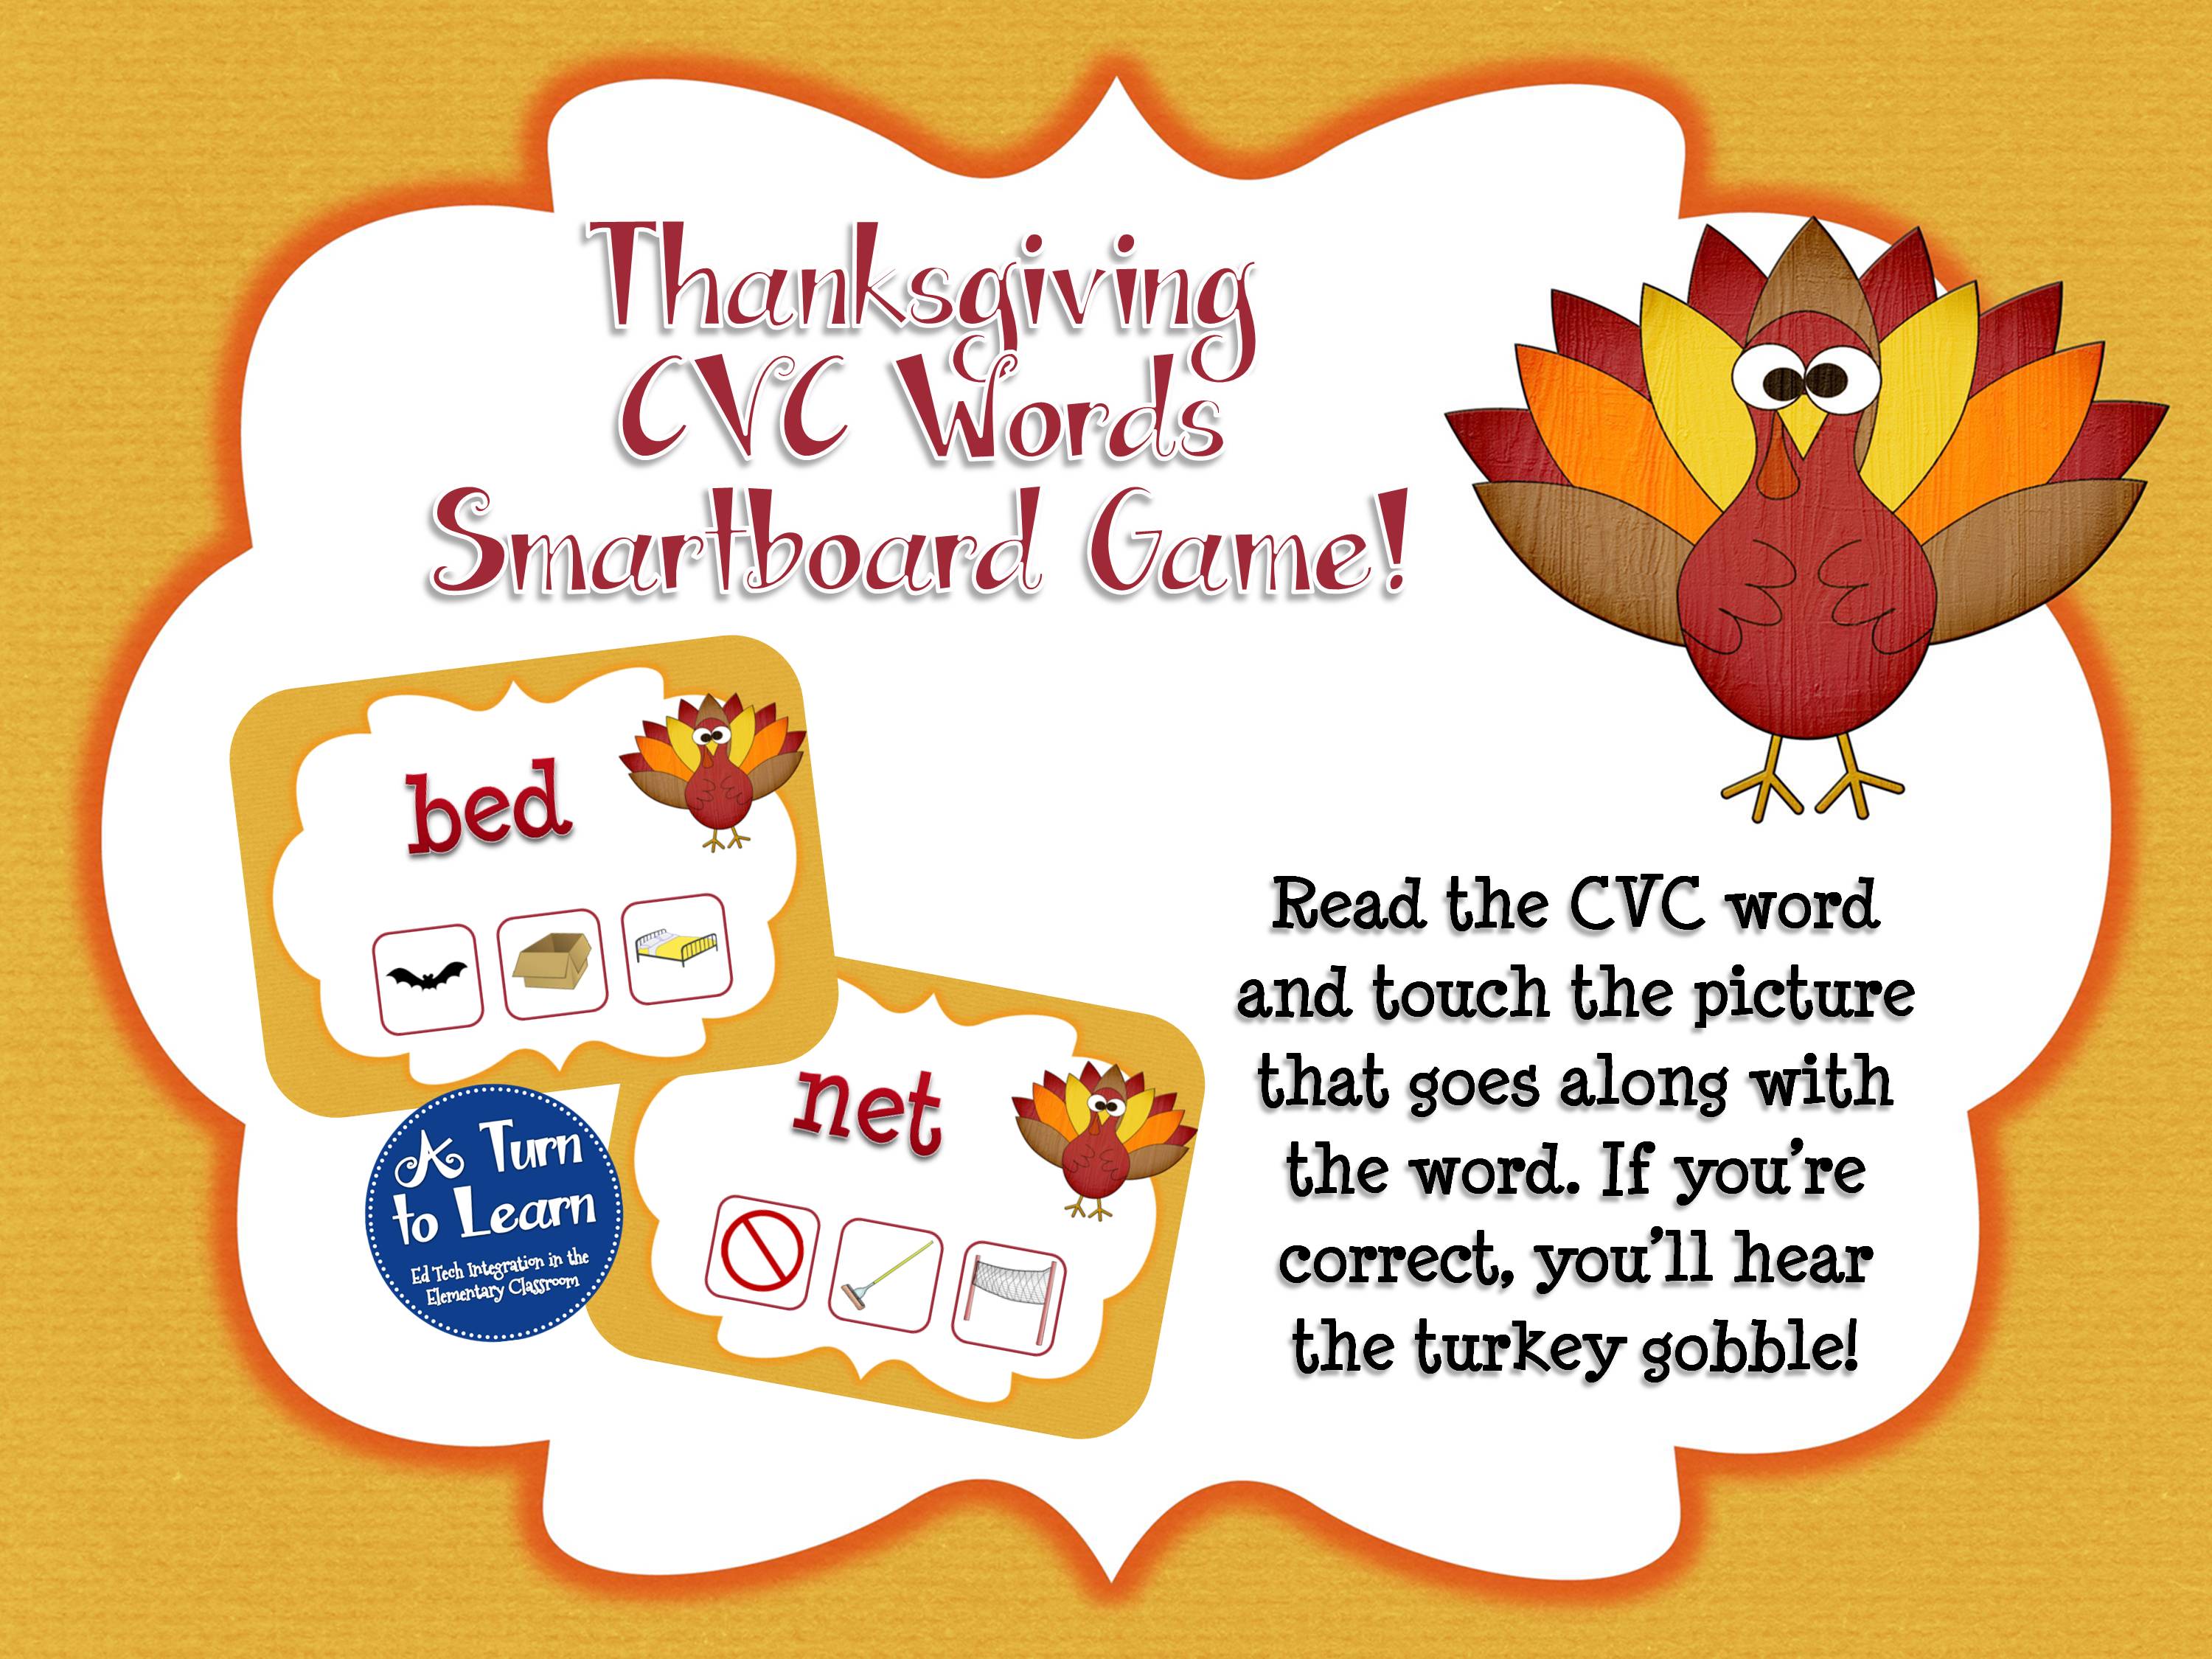 Thanksgiving themed smartboard game for reading CVC words